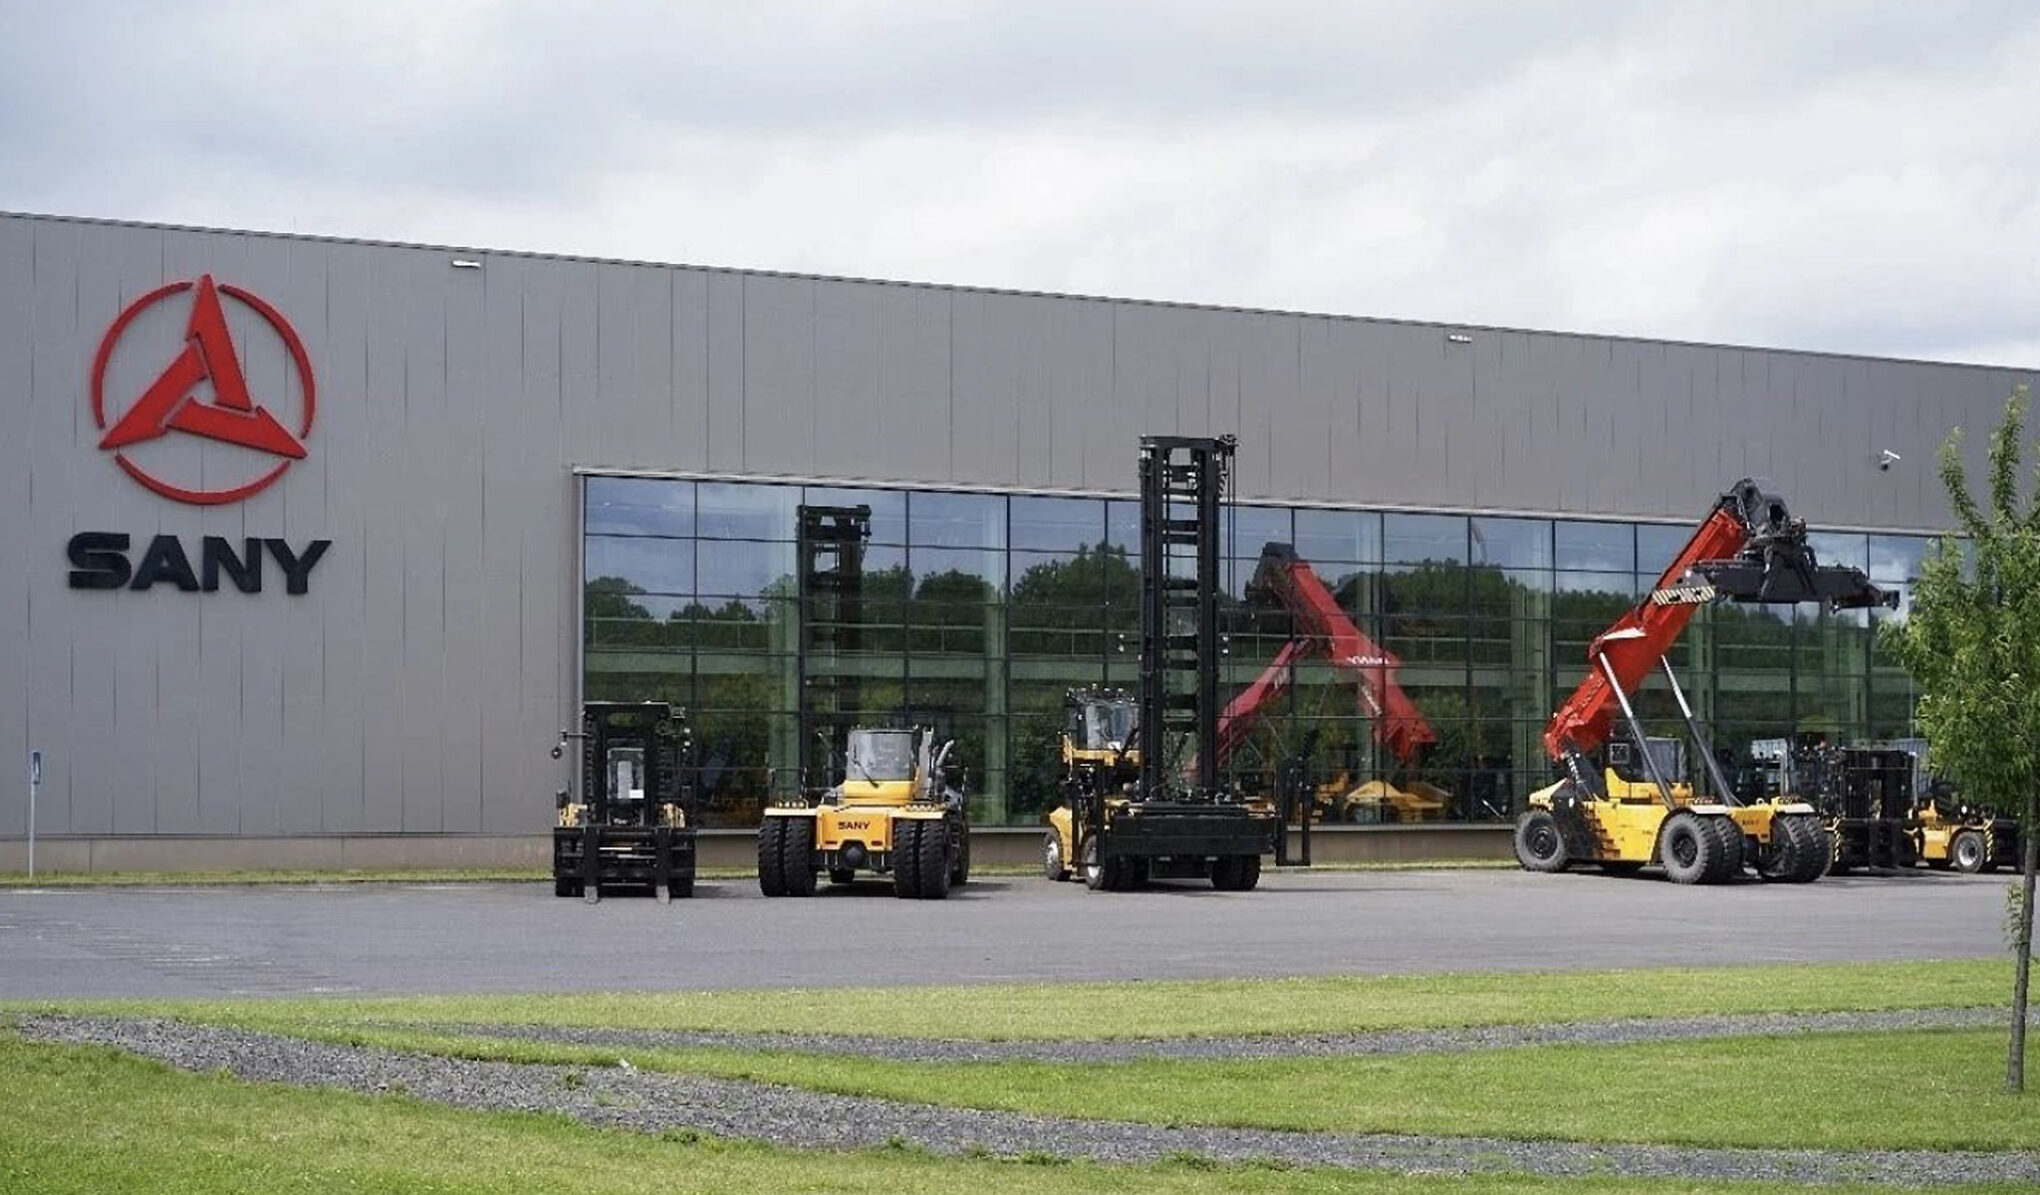 Photo of the SANY Material Handler Range Outside SANY Headquarters